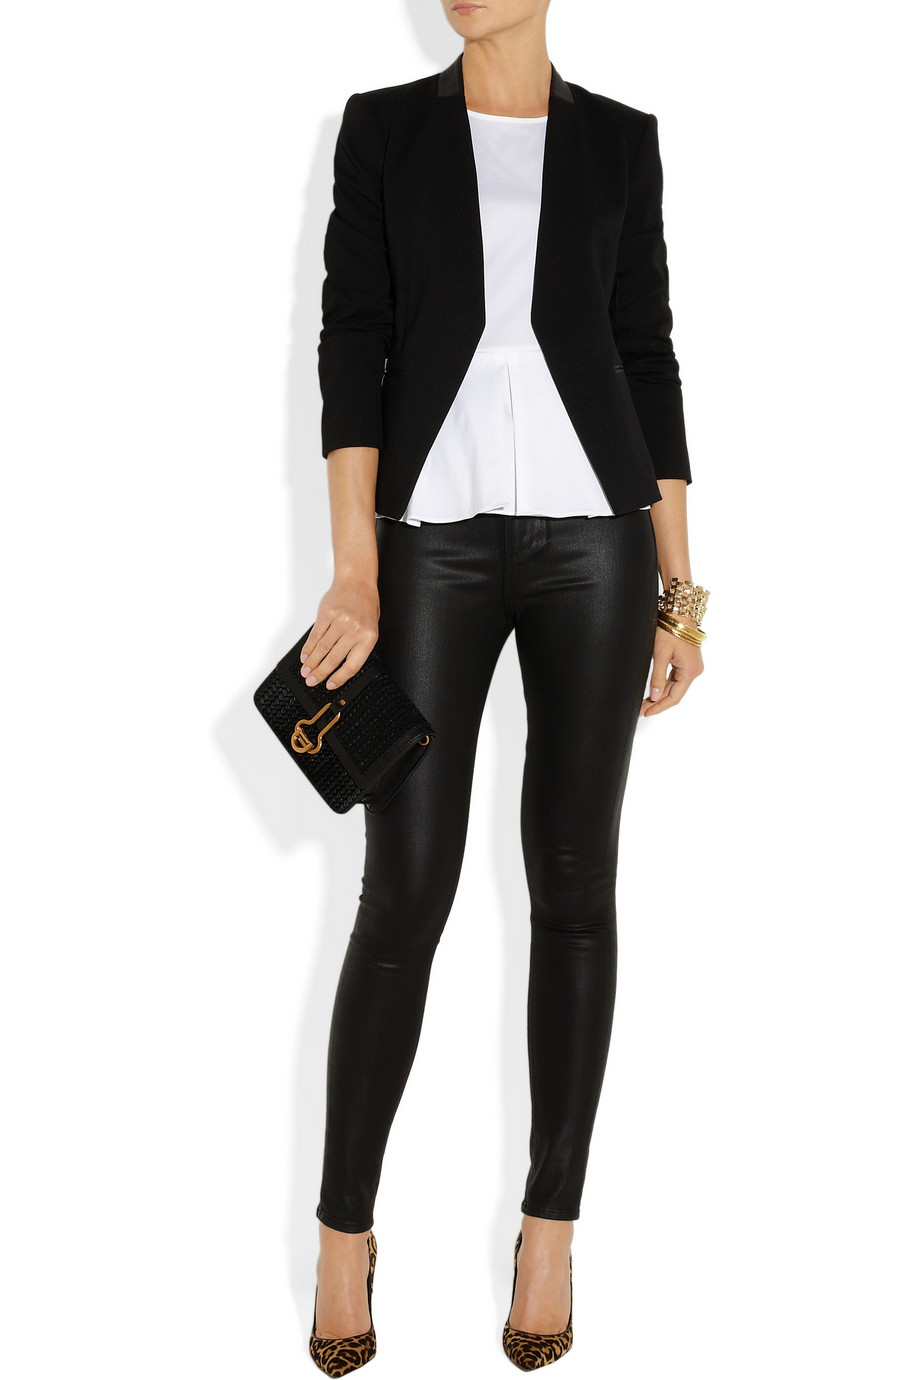 Lyst - Theory Lanai Leather trimmed Stretch ponte Blazer in Black